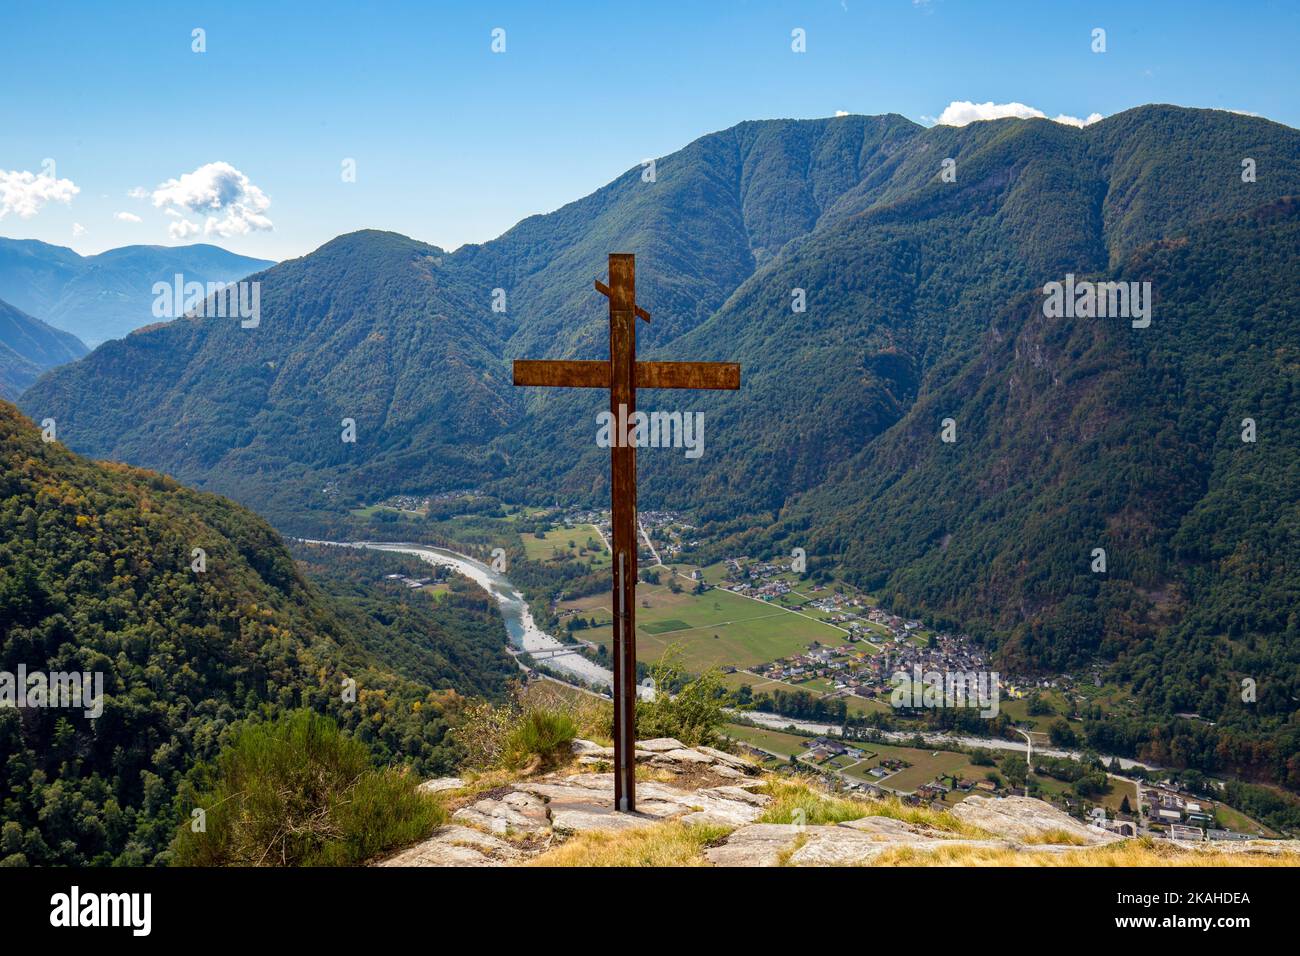 Picturesque vantage point with dominant steel cross high above the Valle Maggia in Switzerland. Stock Photo